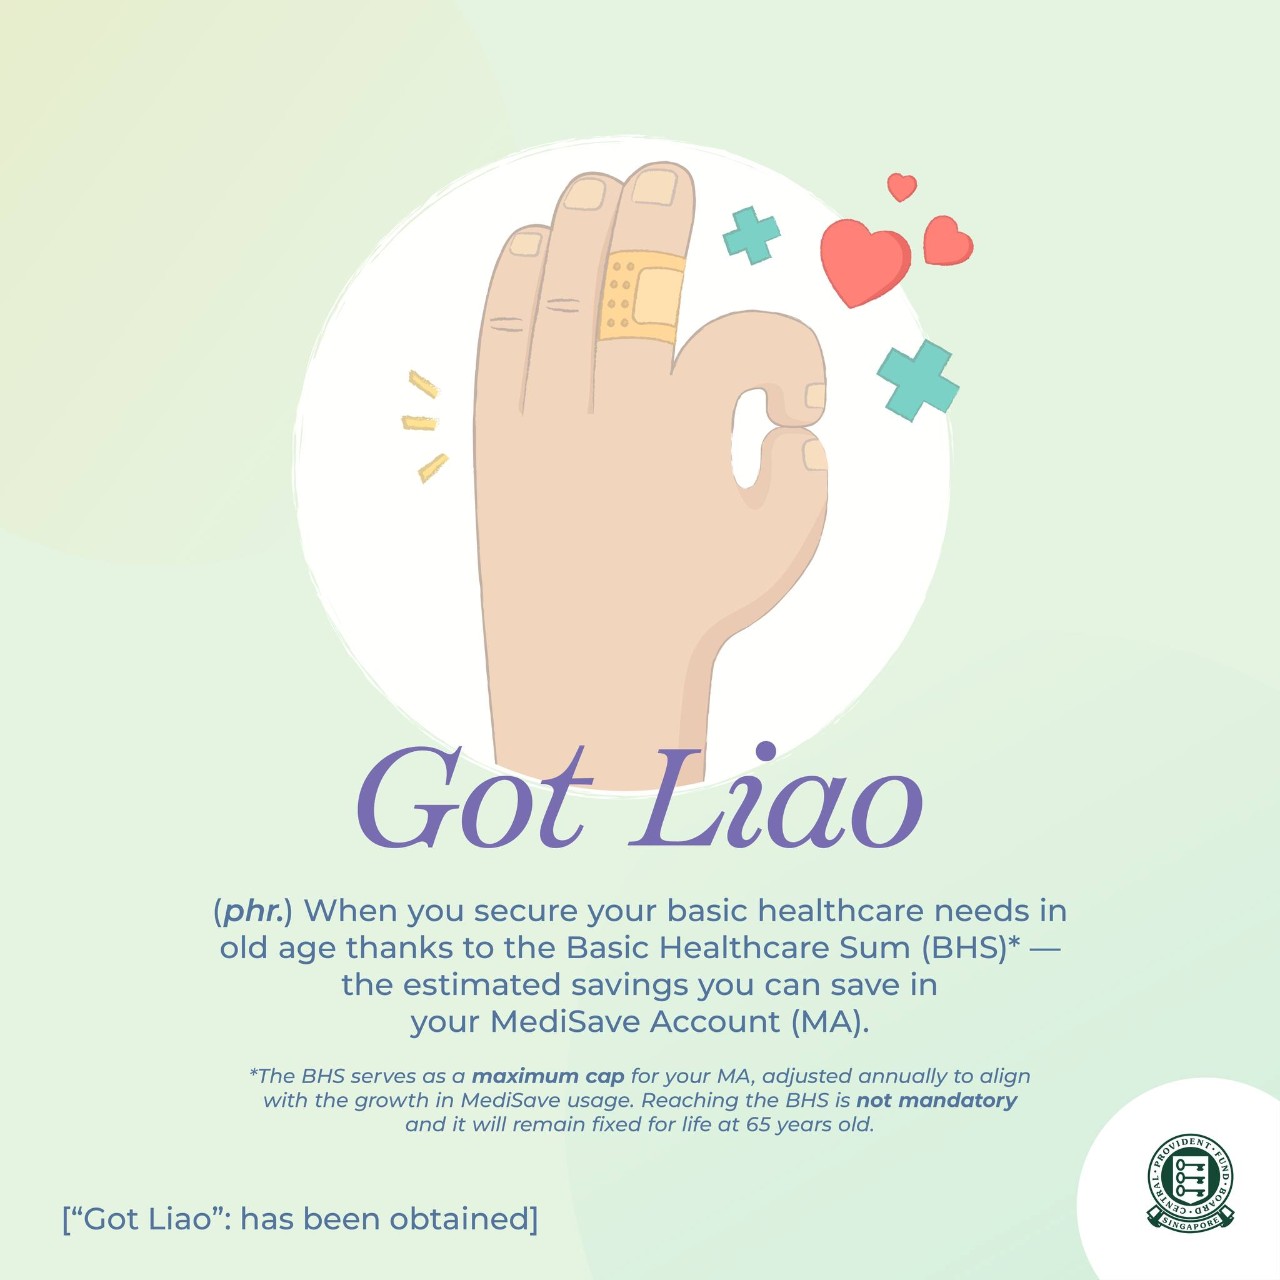 Got your basic healthcare needs covered liao?